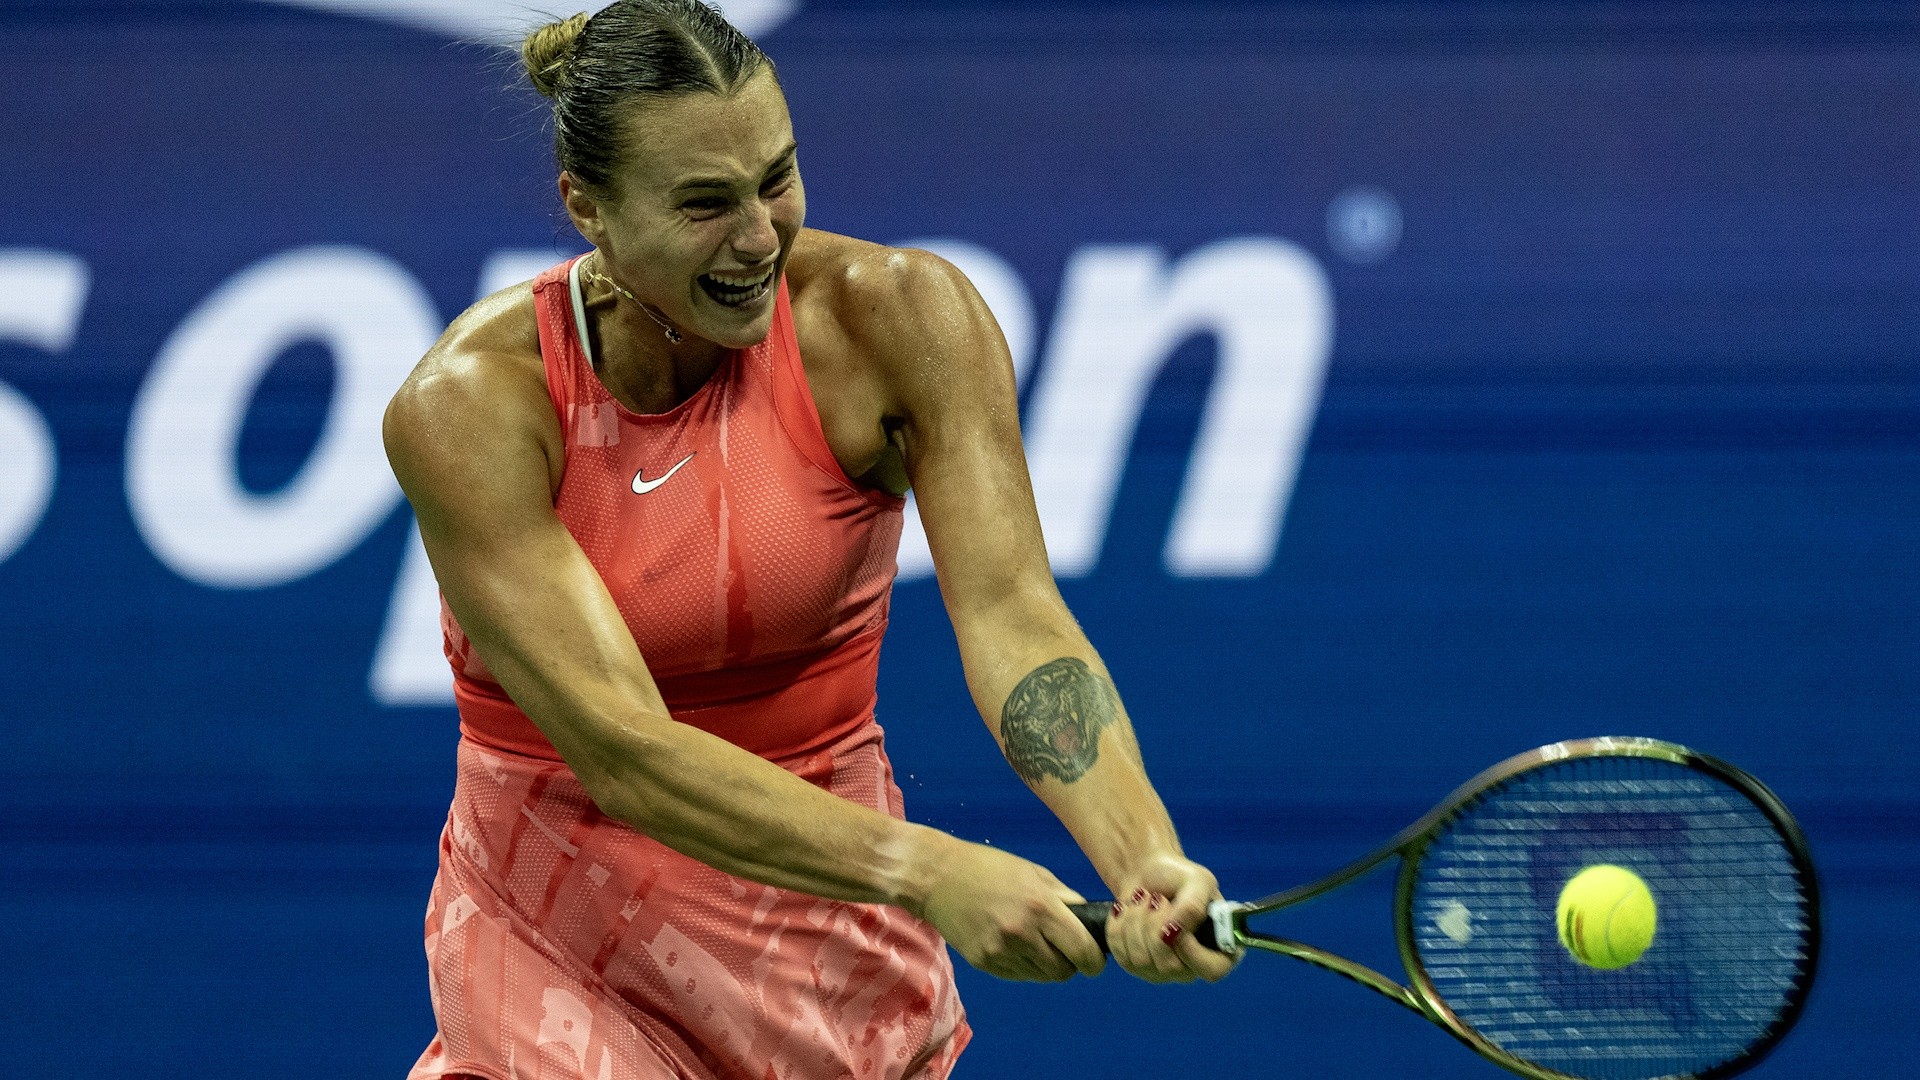 Aryna Sabalenka may now be top ranked, but she is focused on U.S